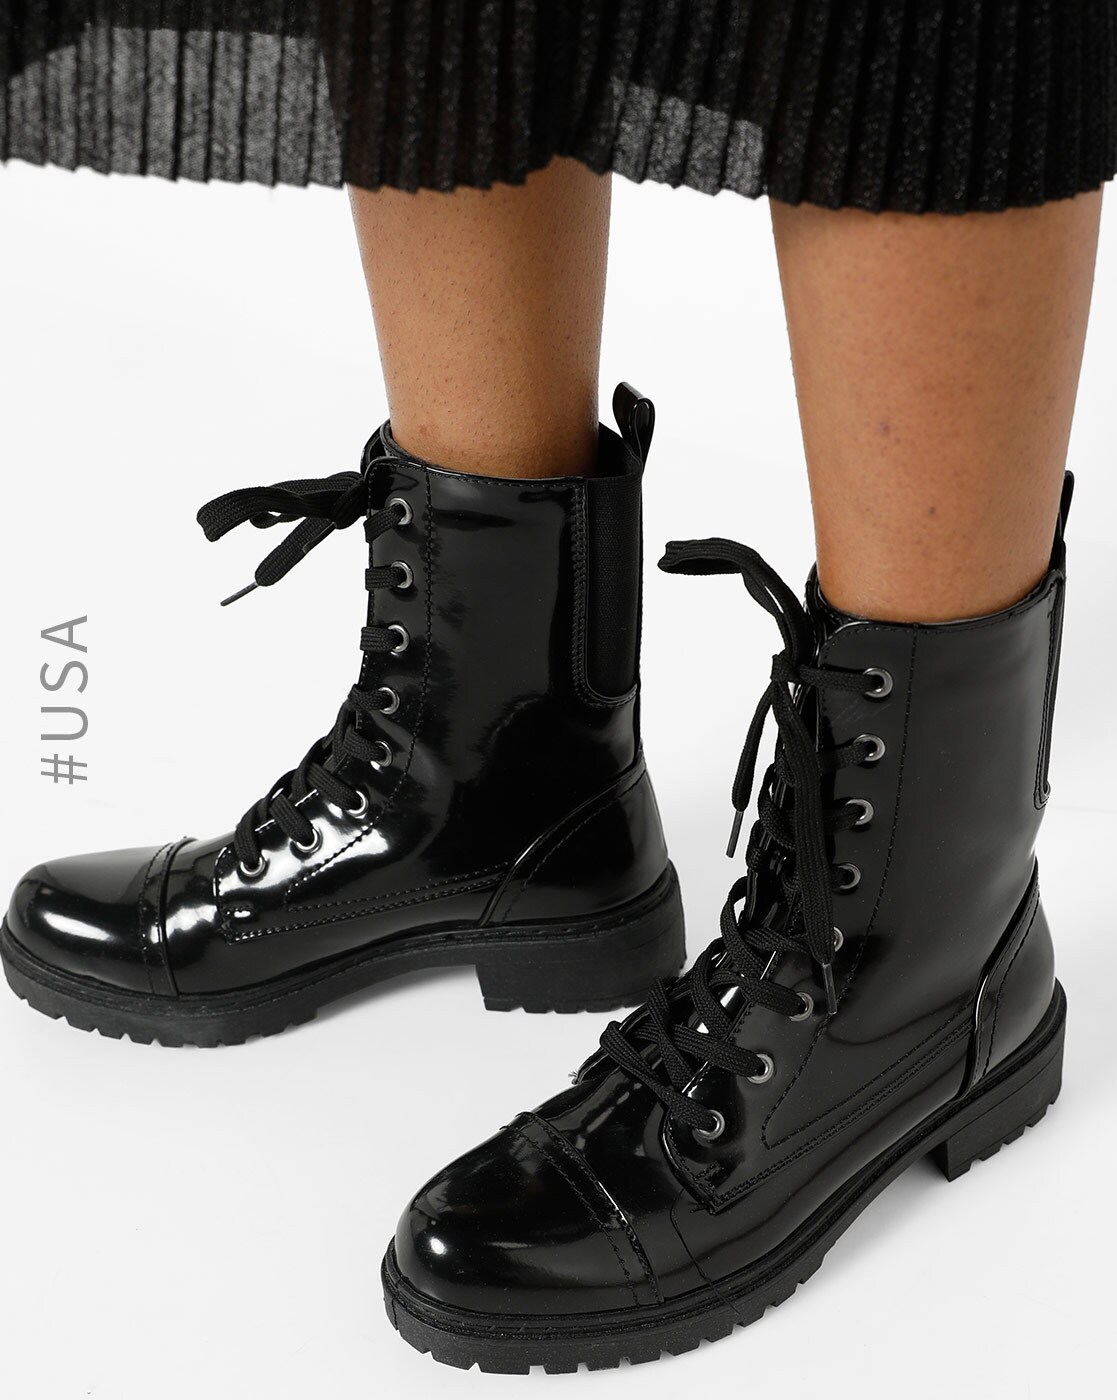 mid calf lace up heeled boots